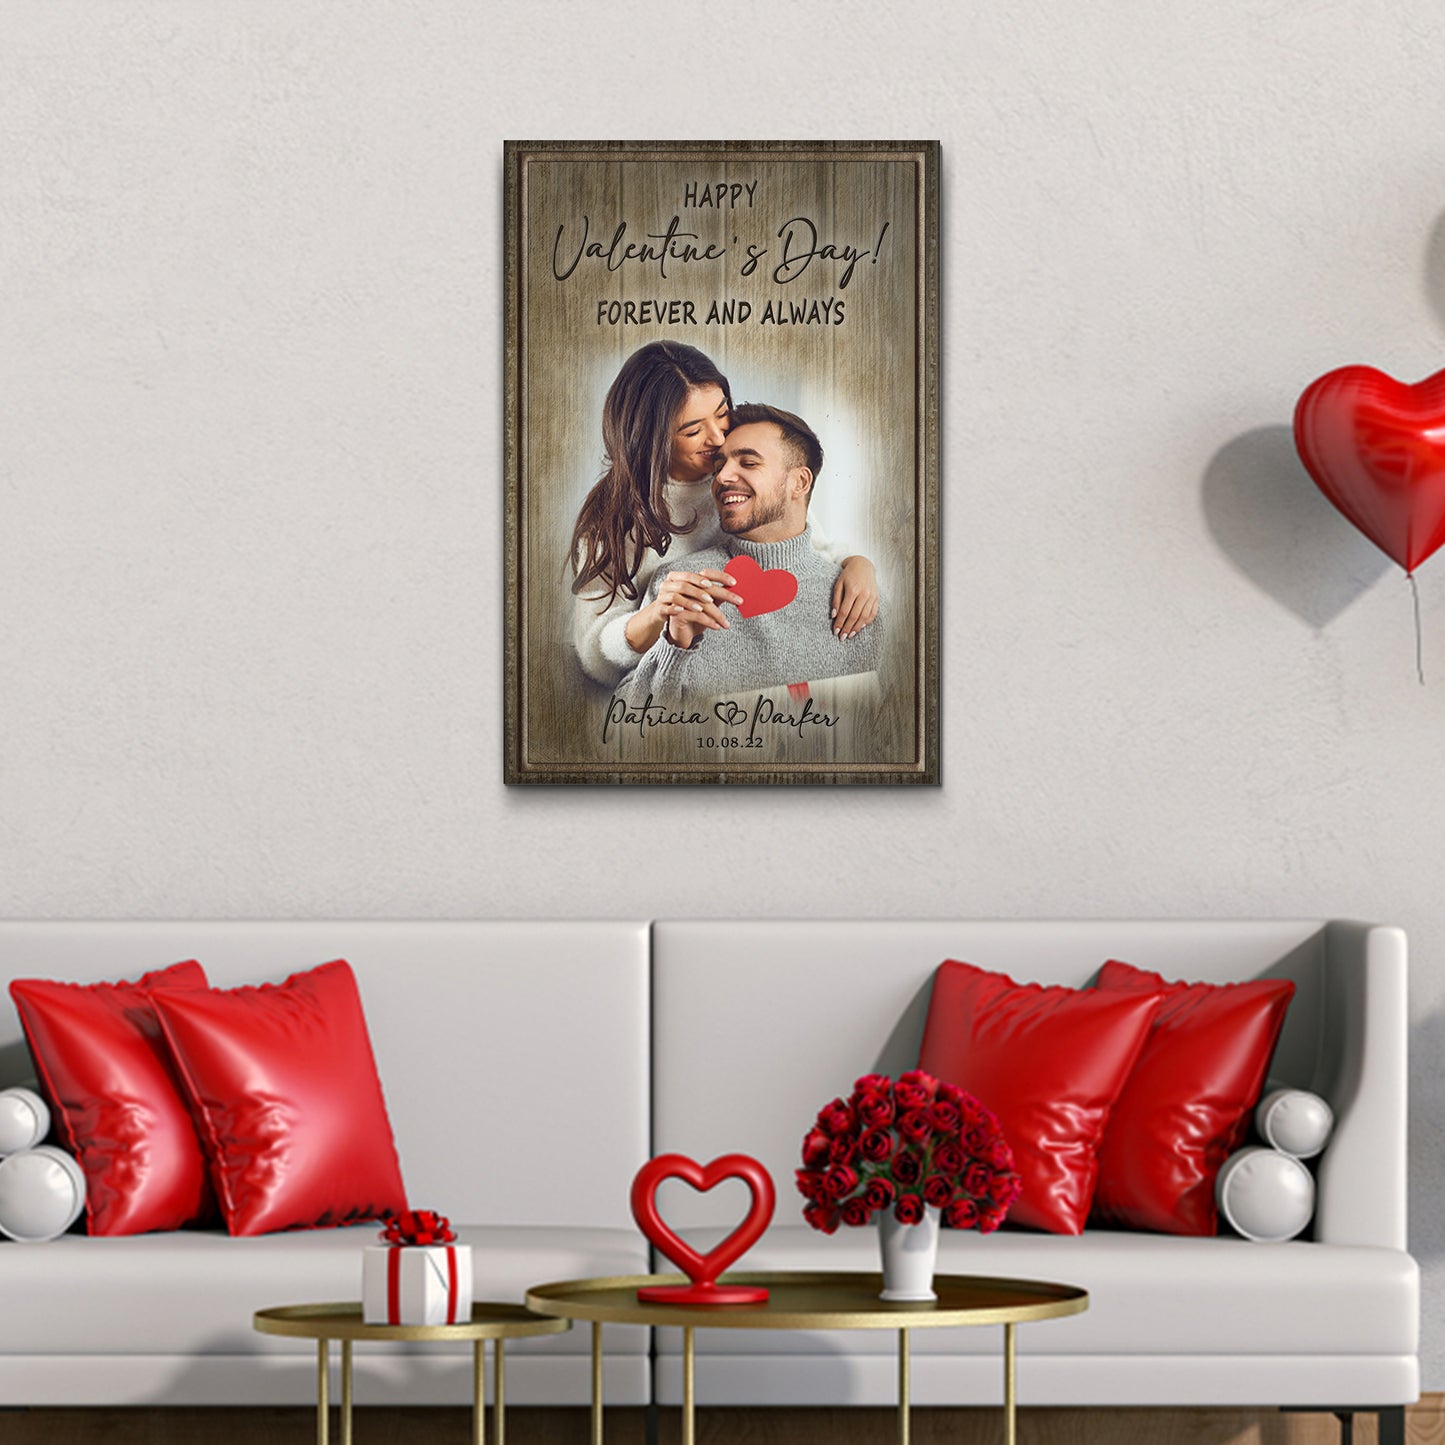 Valentines Forever and Always Rustic Sign - Image by Tailored Canvases